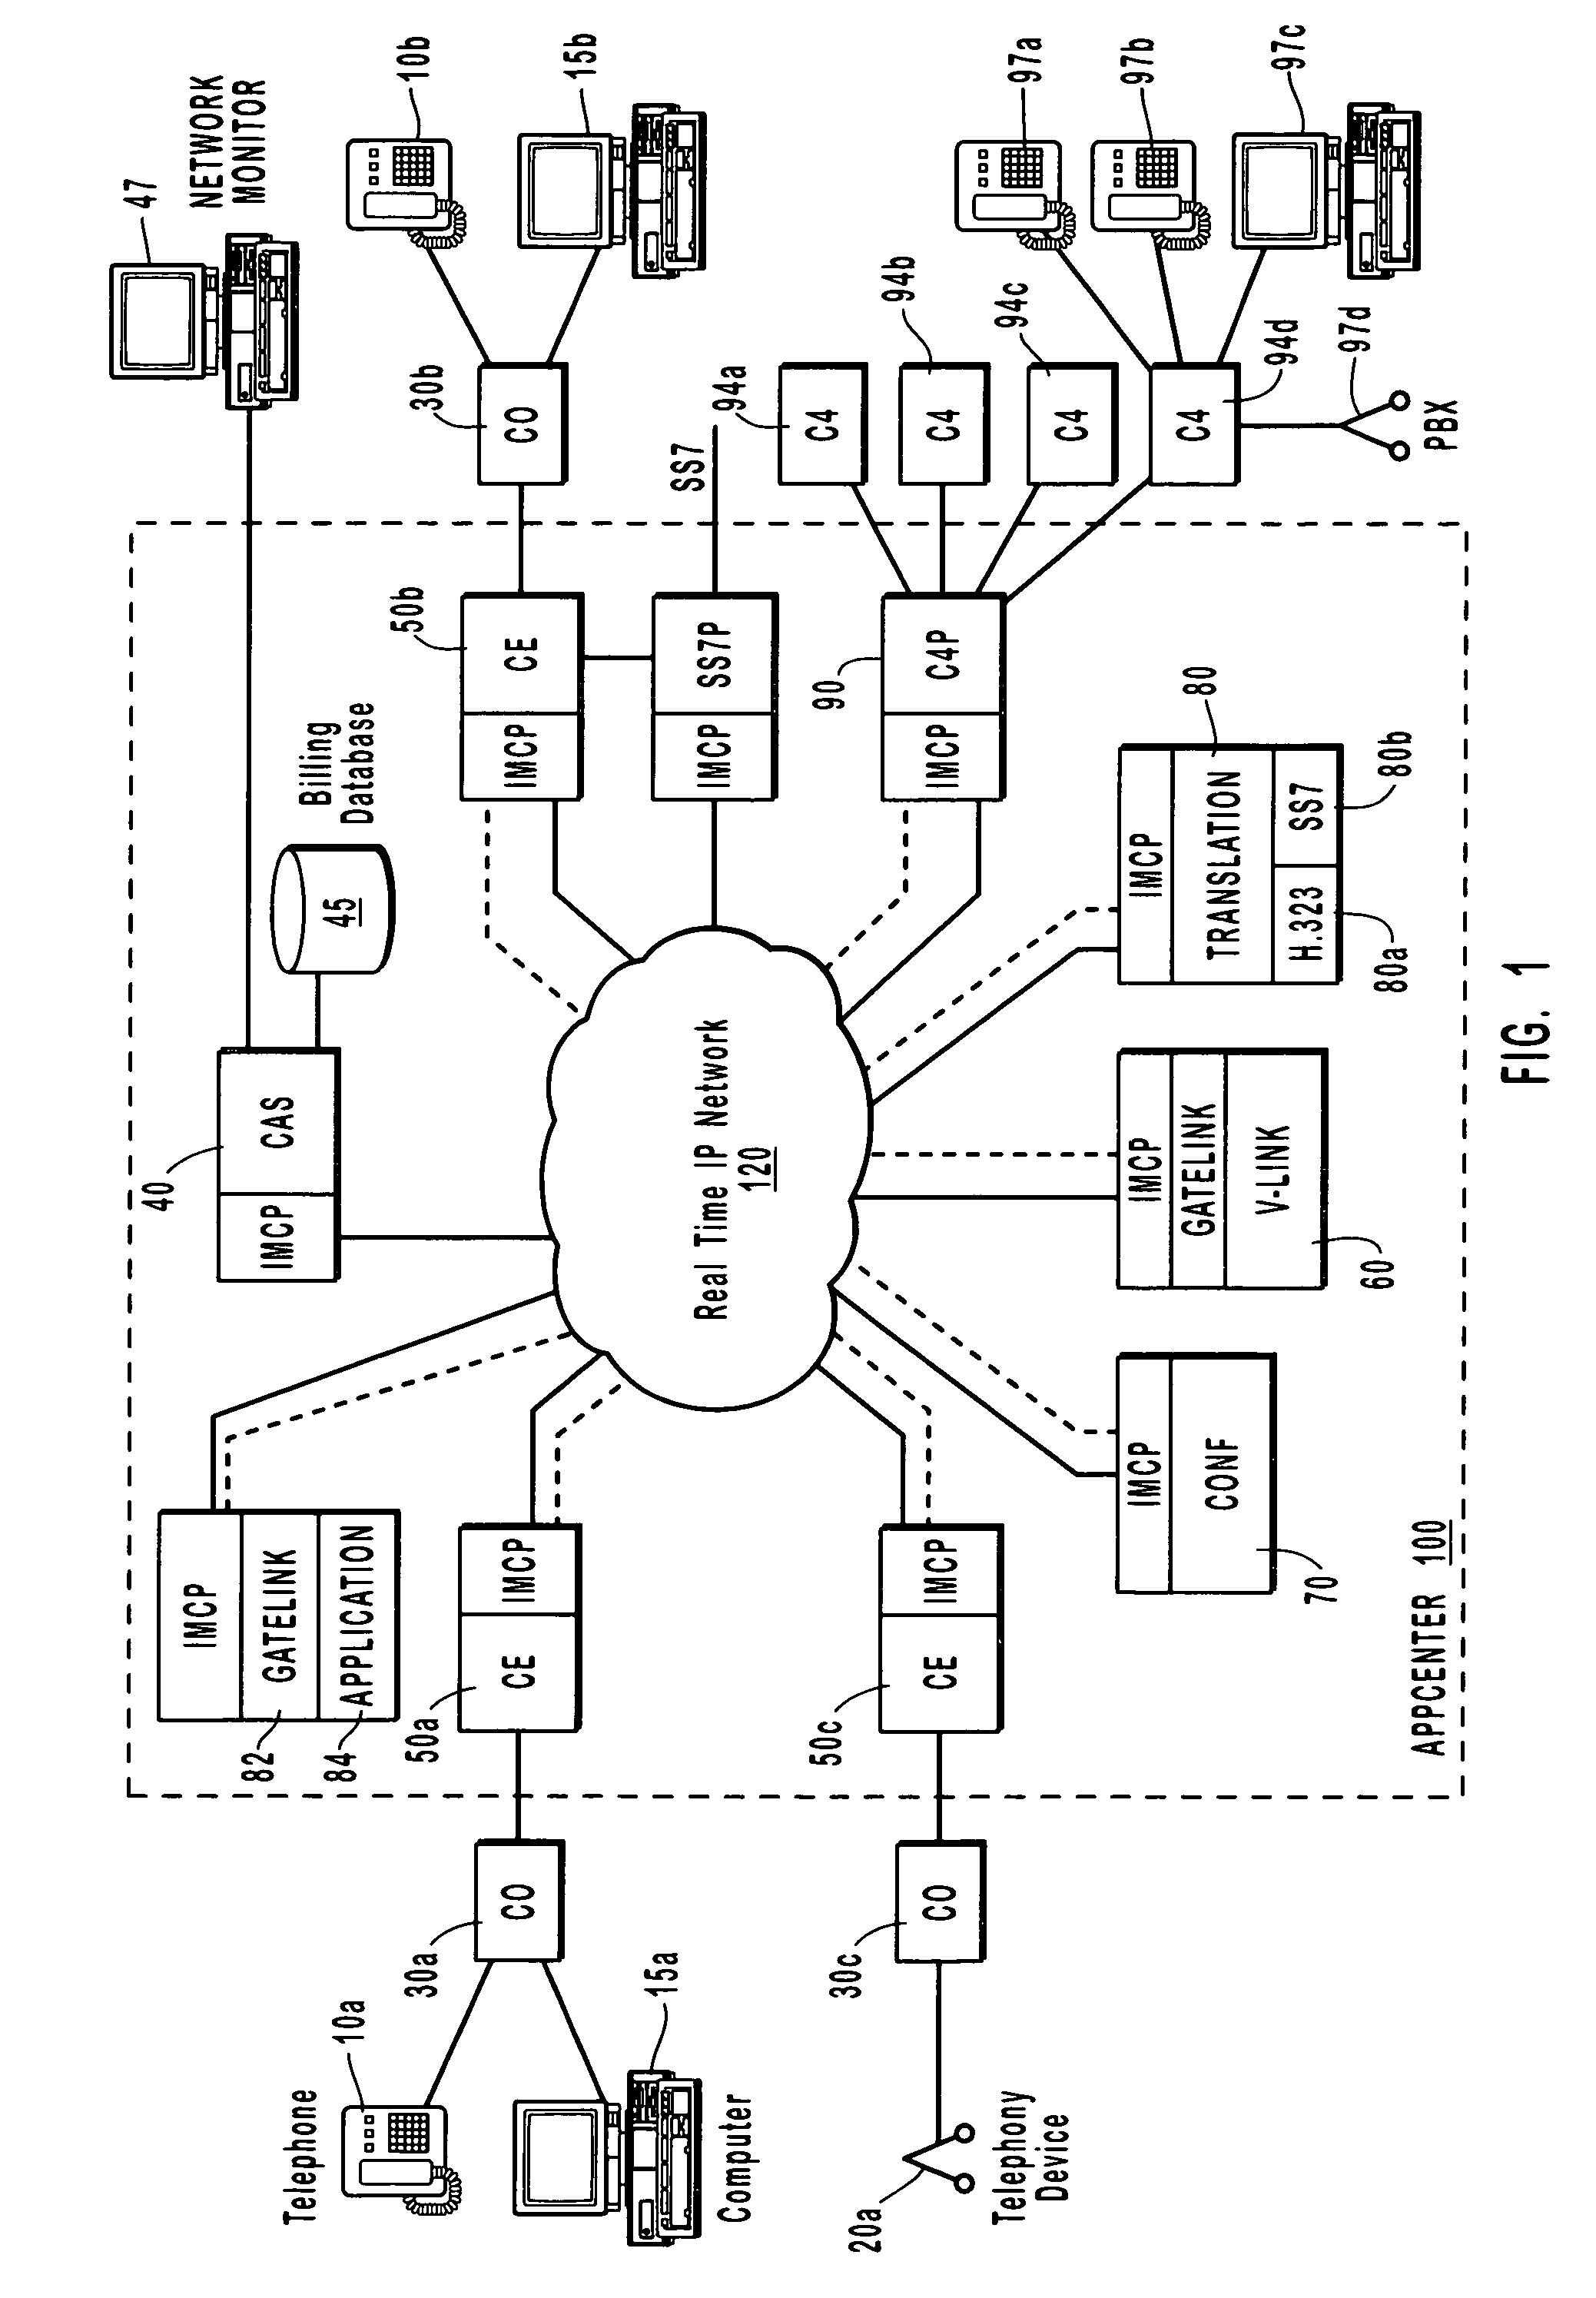 Private IP communication network architecture